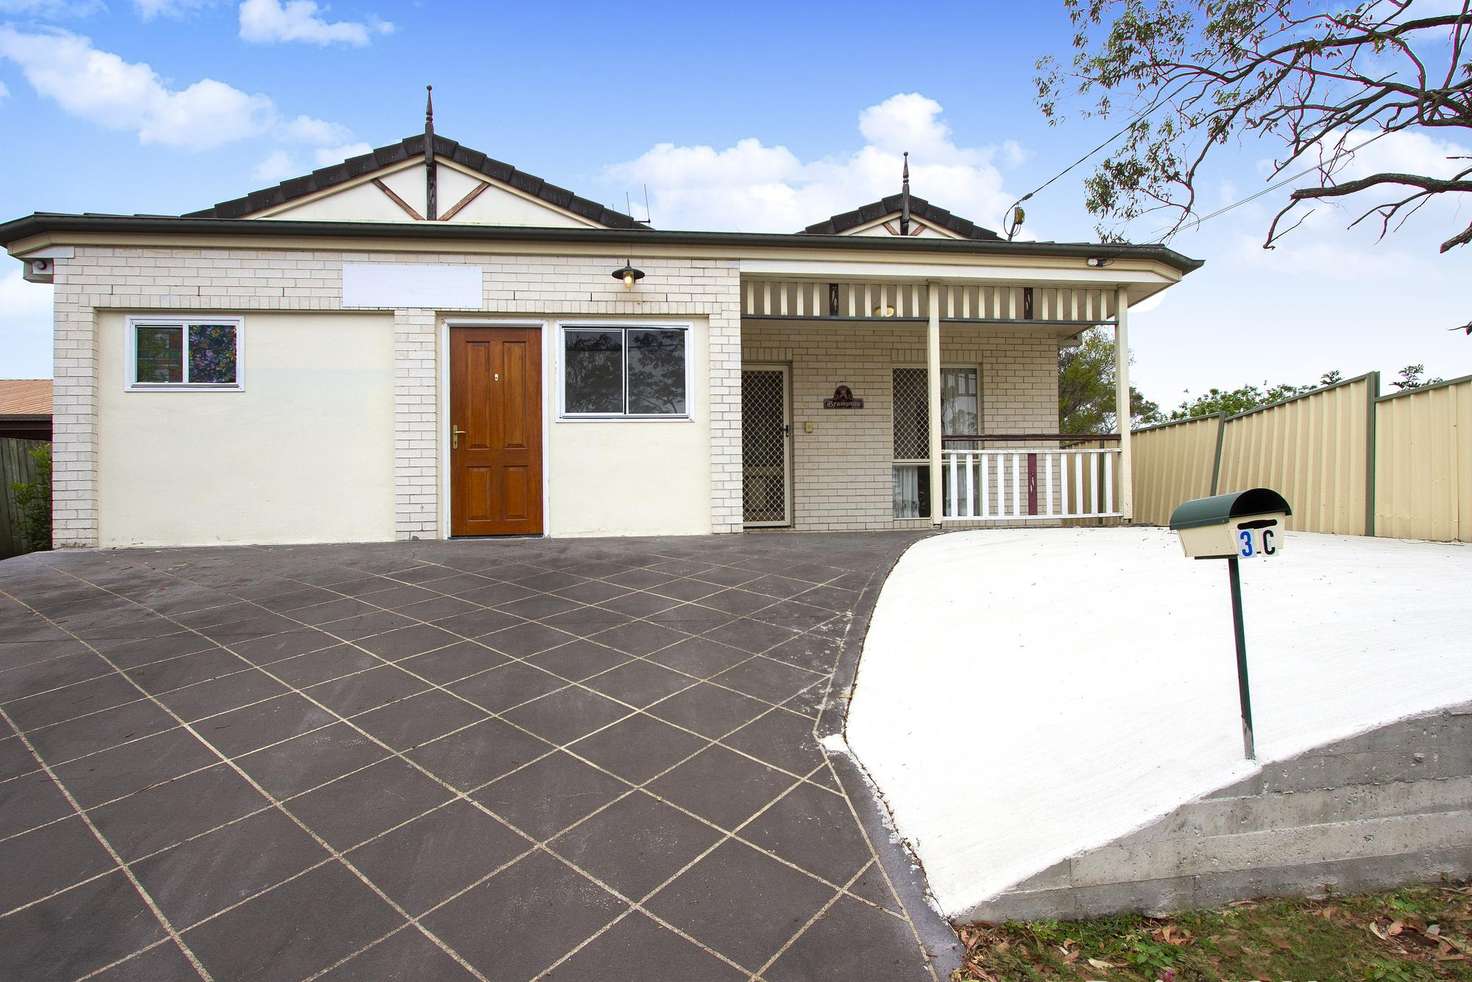 Main view of Homely house listing, 3c Mandew Street, Shailer Park QLD 4128